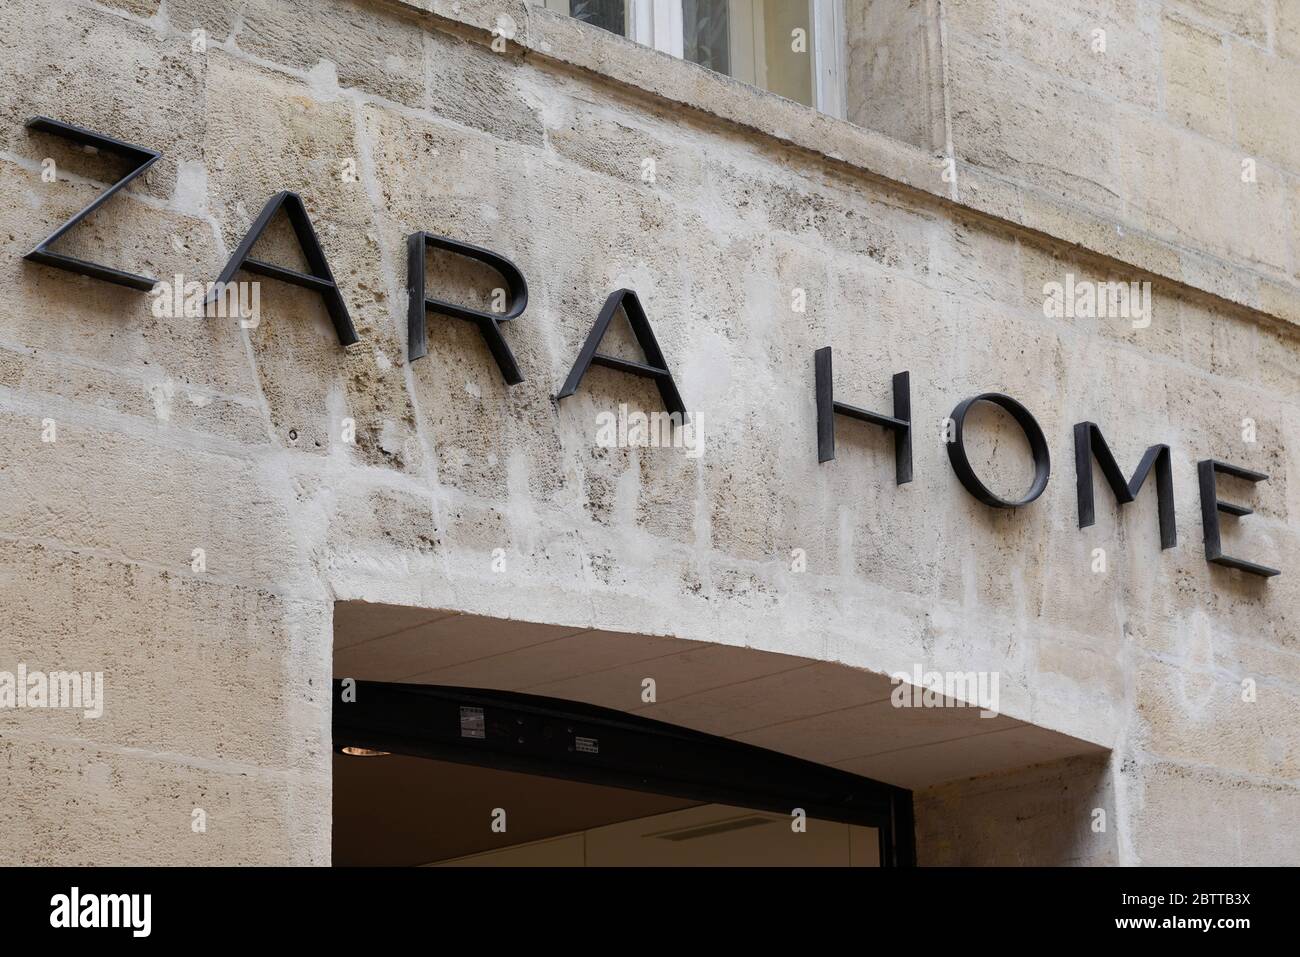 Zara Home Store High Resolution Stock Photography and Images - Alamy